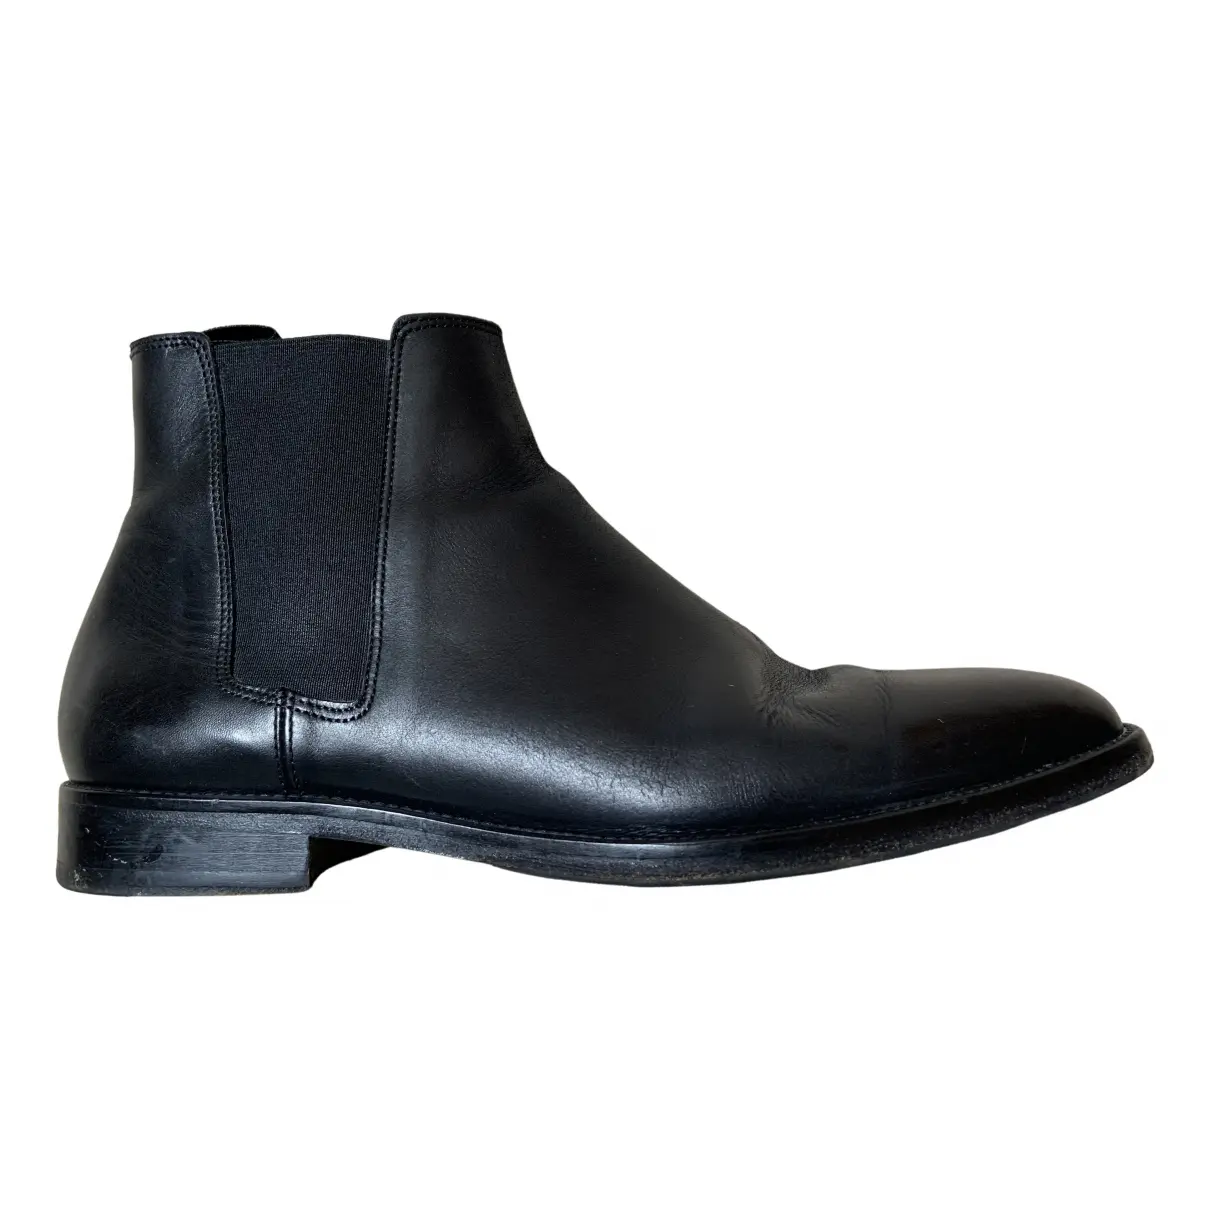 Fall Winter 2019 leather boots Sandro